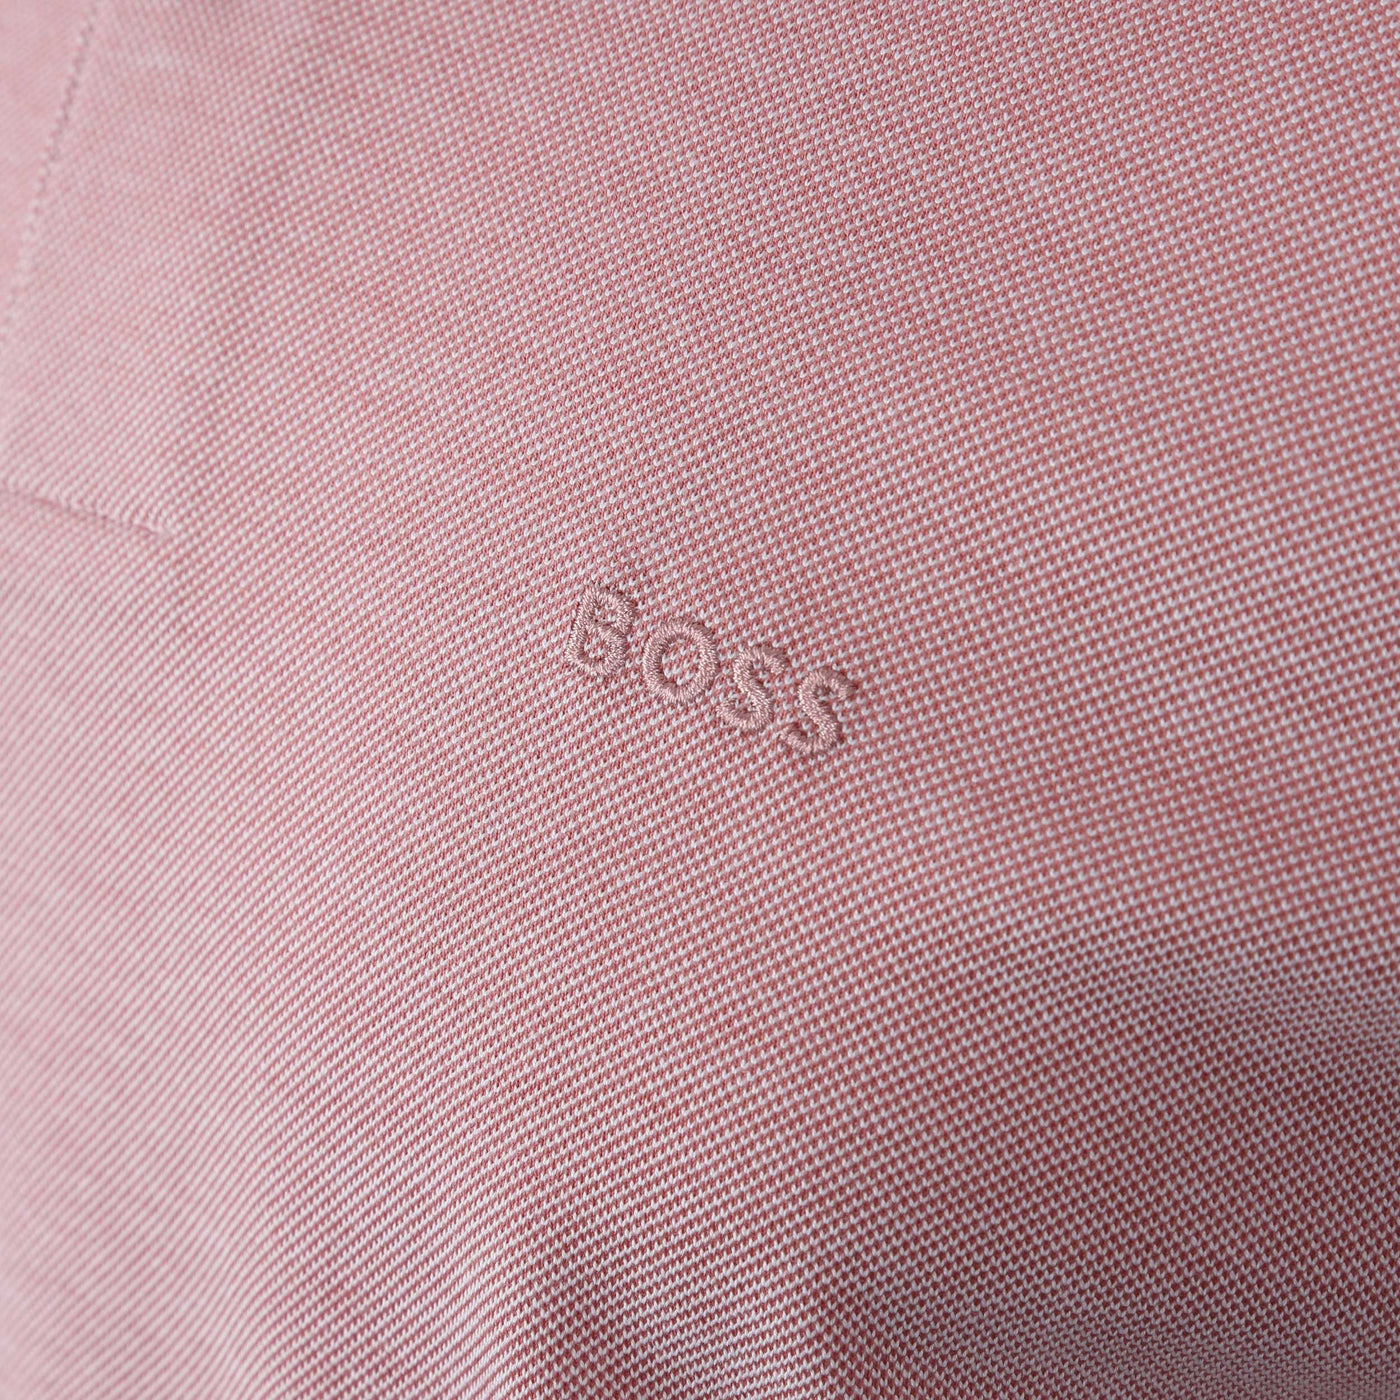 BOSS Parlay 183 Polo Shirt in Mid Pink Logo